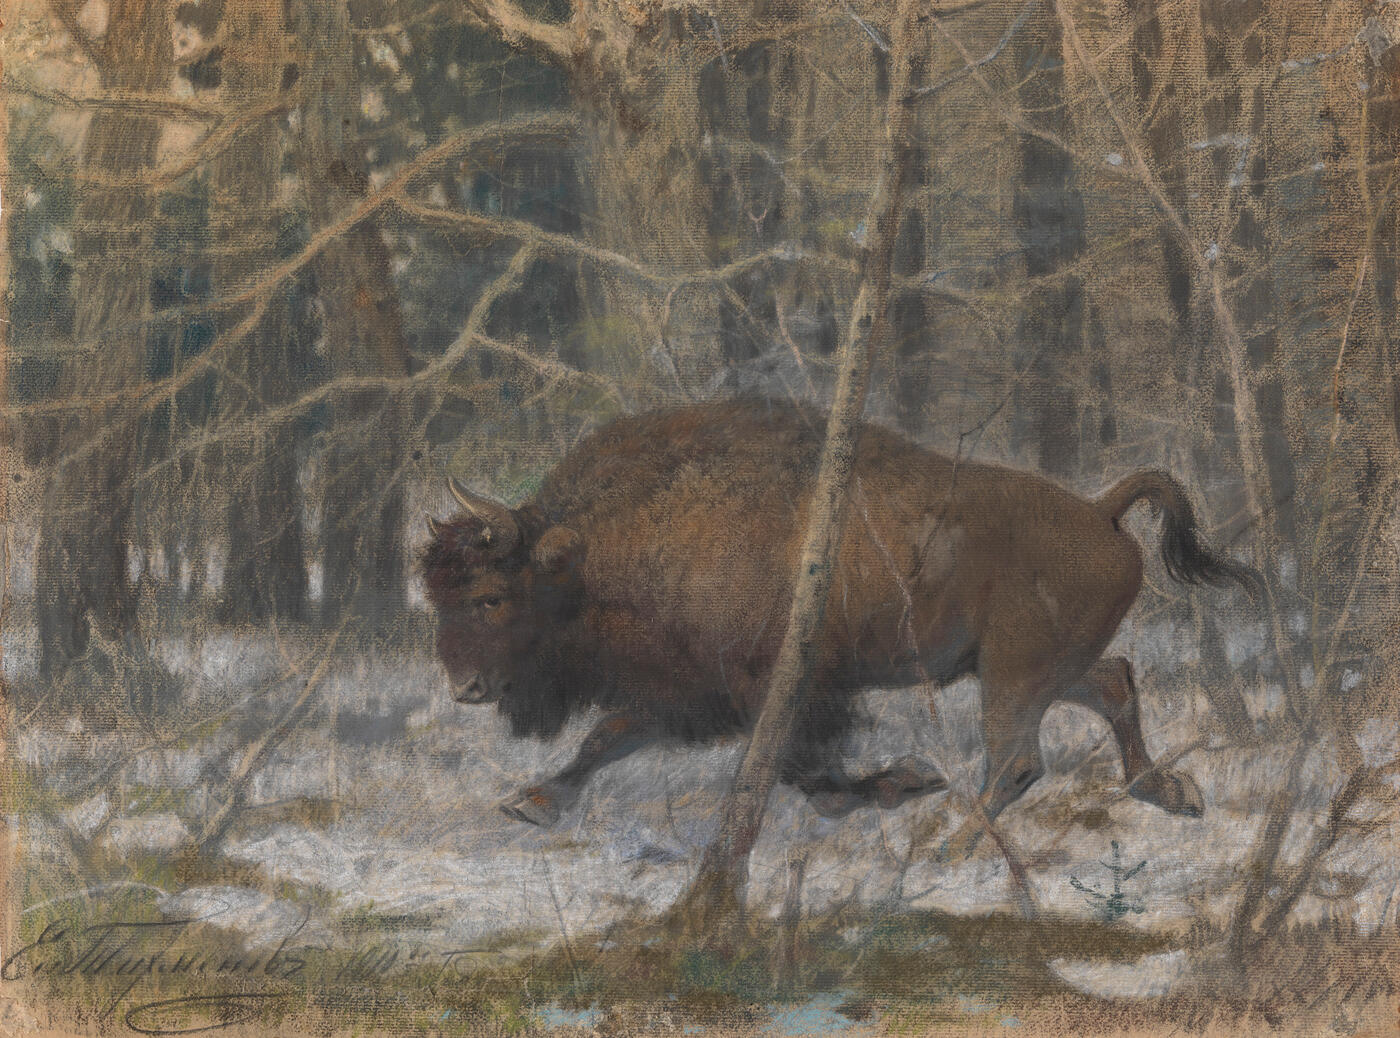 Bison and Hunting Scene